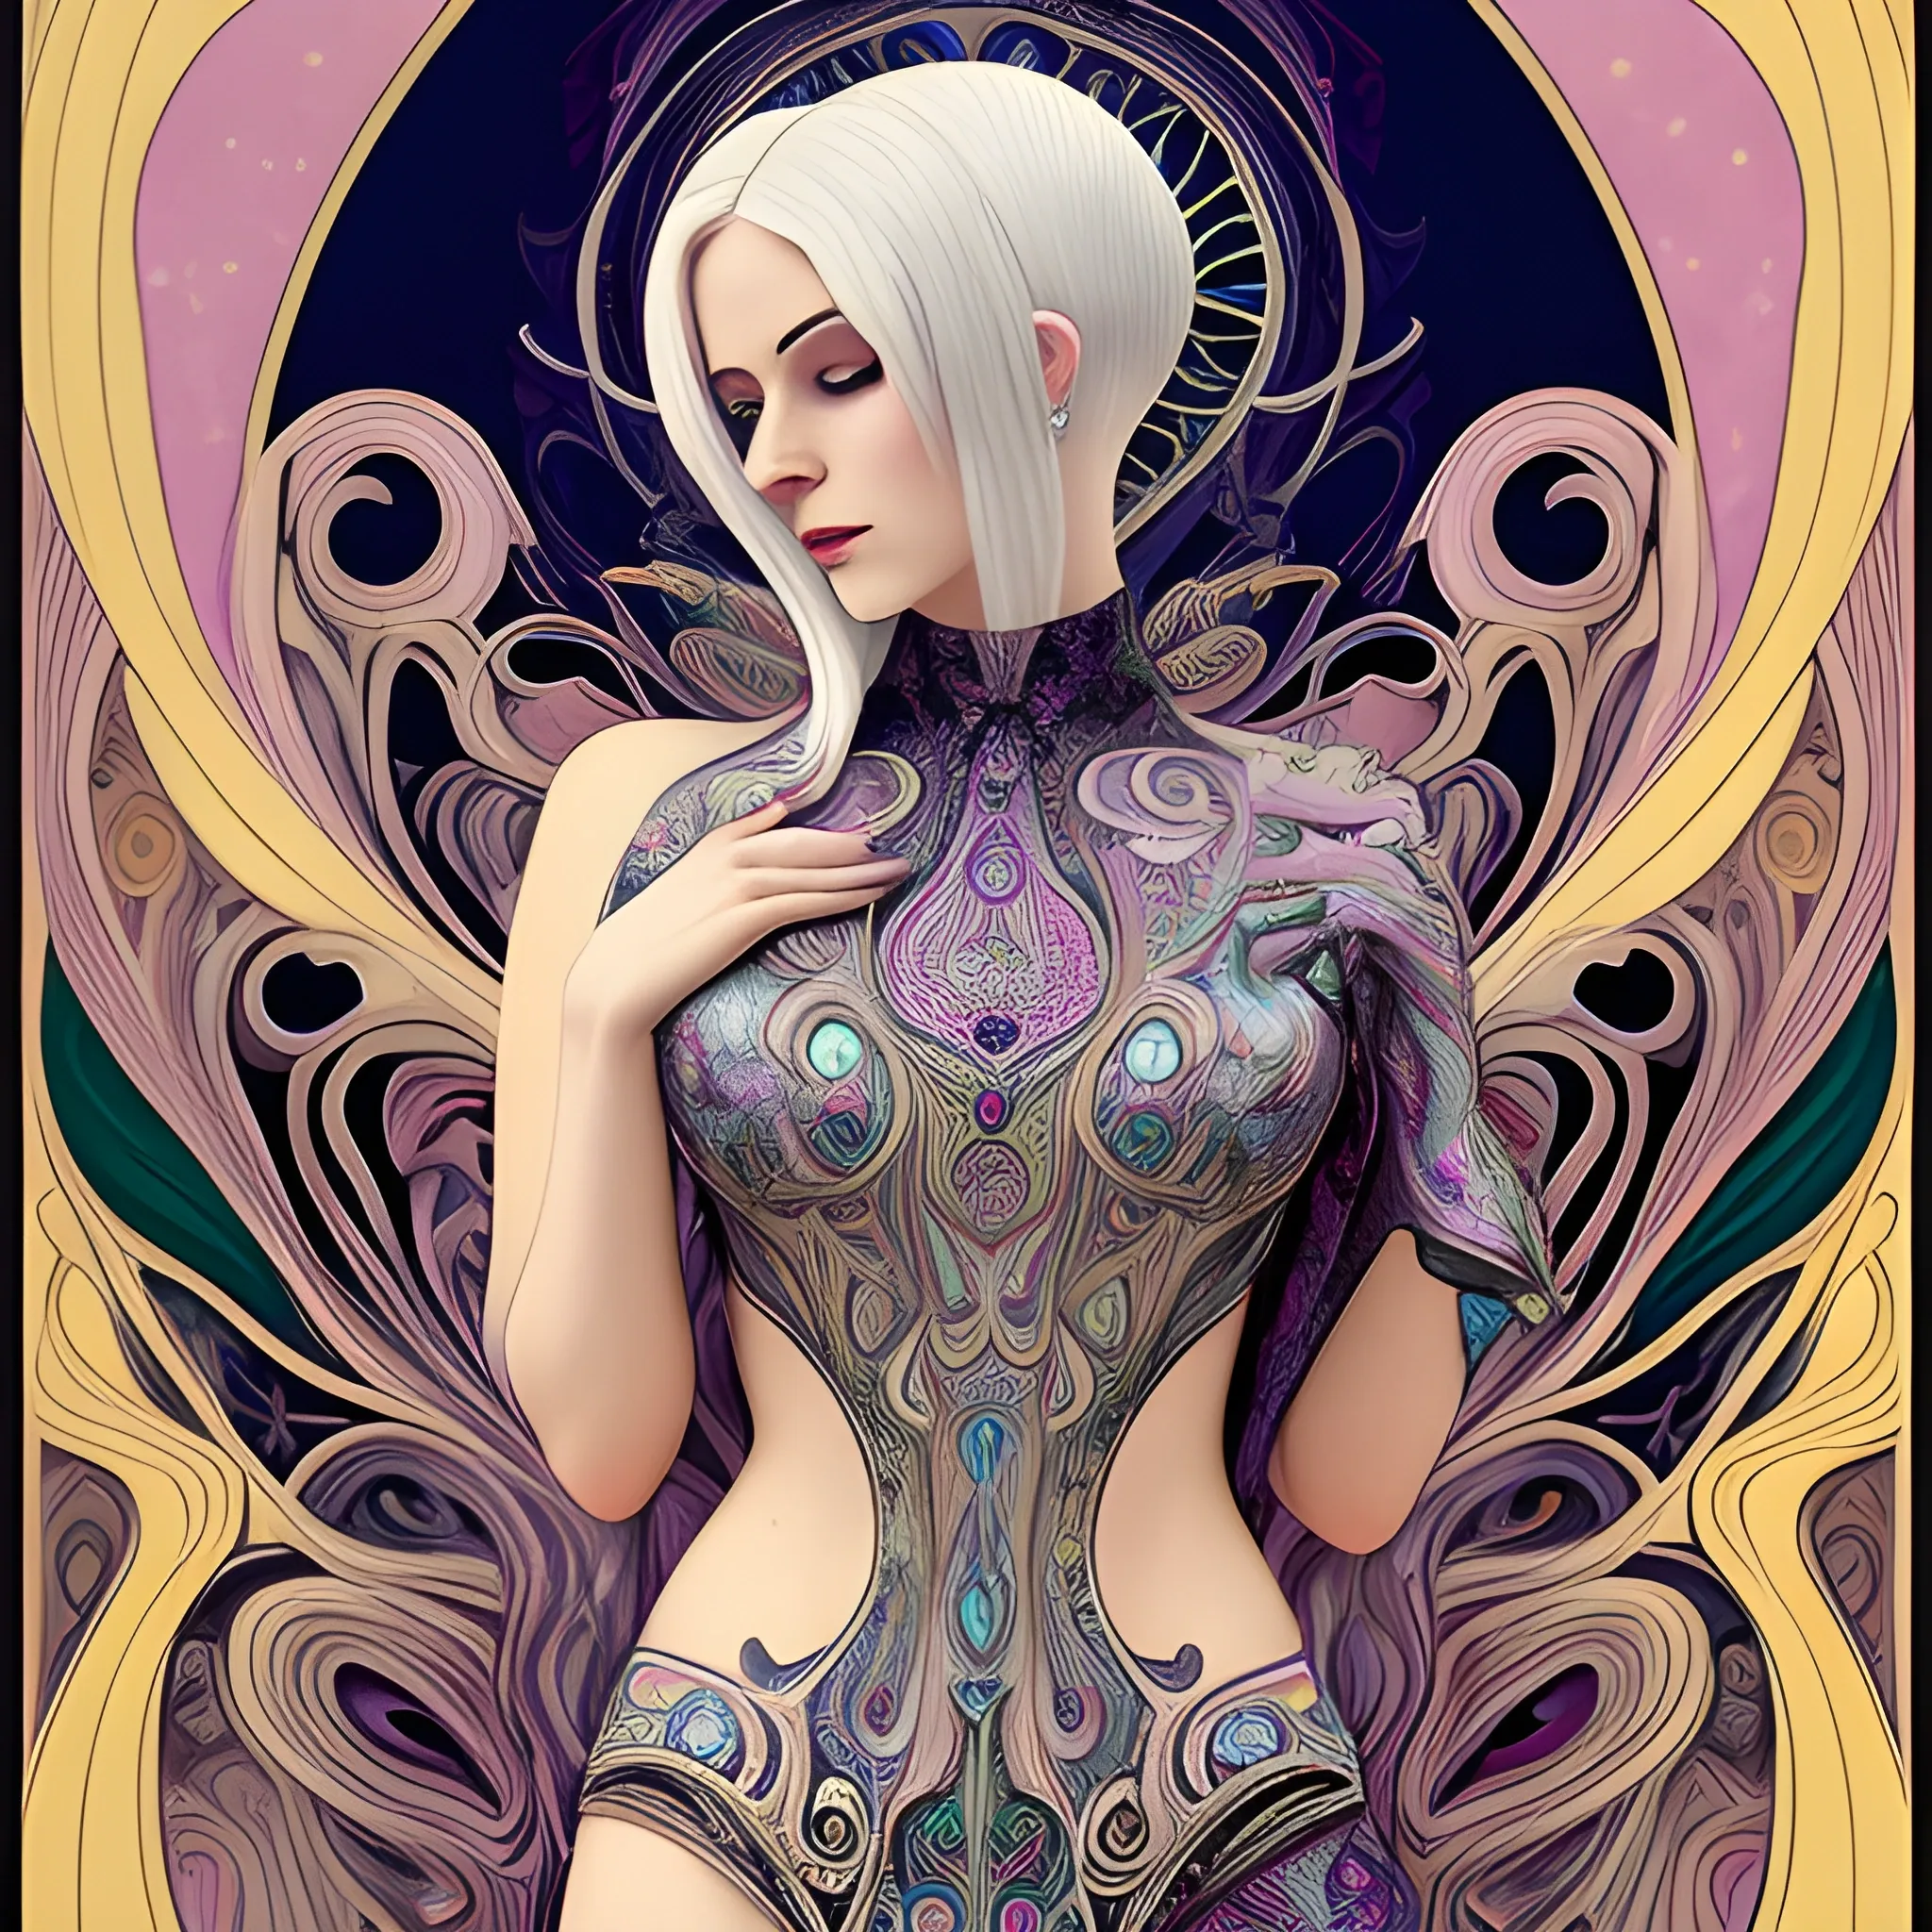 Art Nouveau painting, true aesthetics, stylish fashion shot of a beautiful woman with platinum hair, posing in front of a psychedelic art nouveau style. Highly detailed, highest quality, 